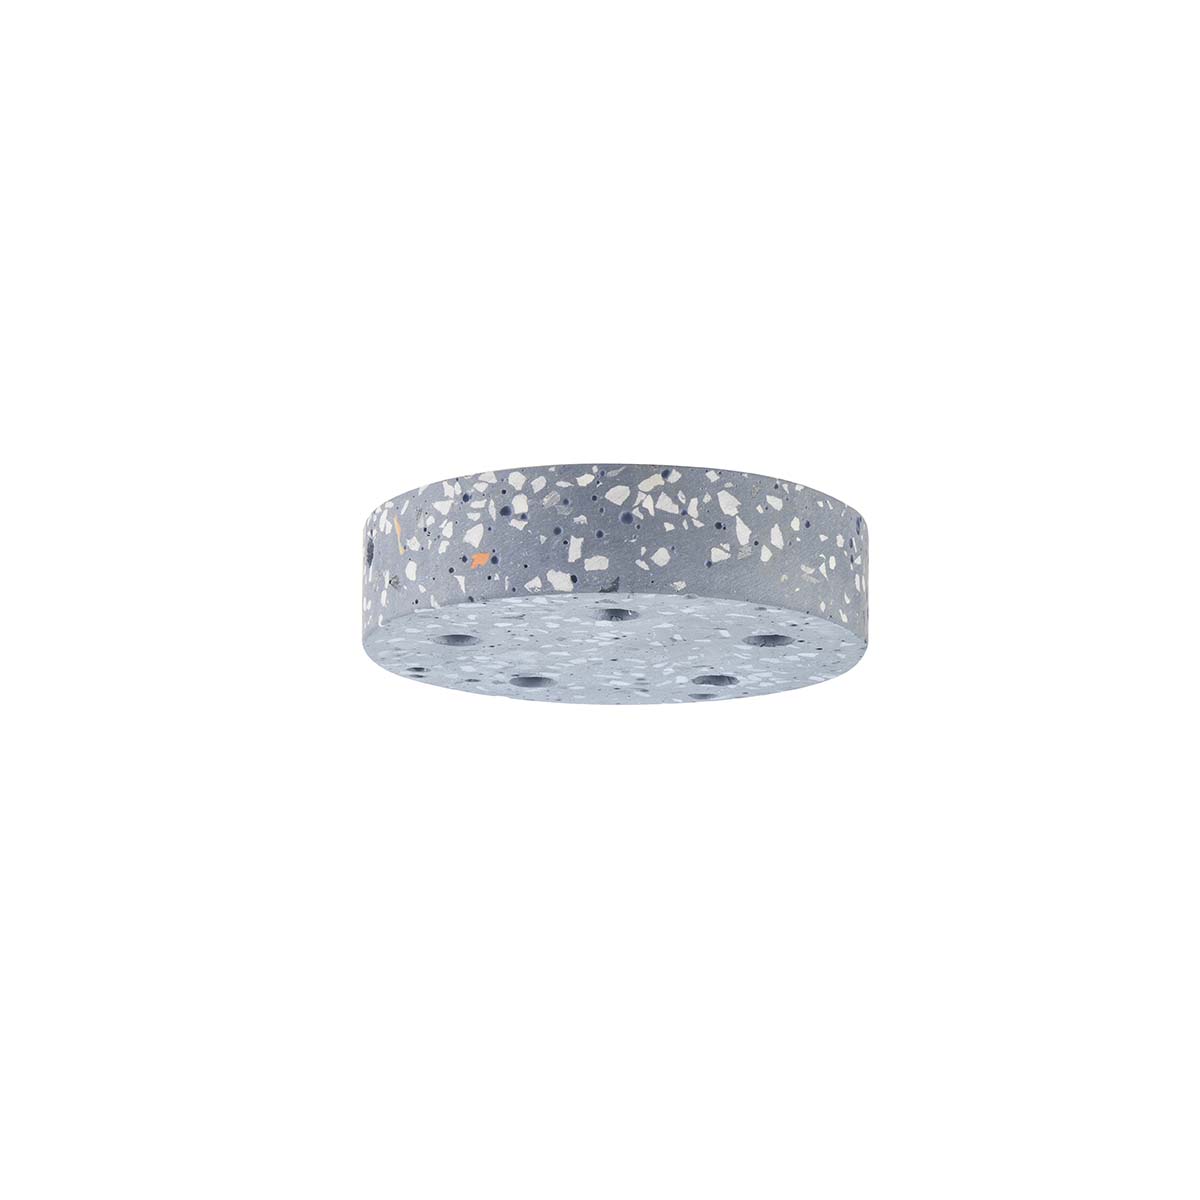 Tangla lighting - TLCP026-05BL - Water stone 5 Lights round canopy stage - blue